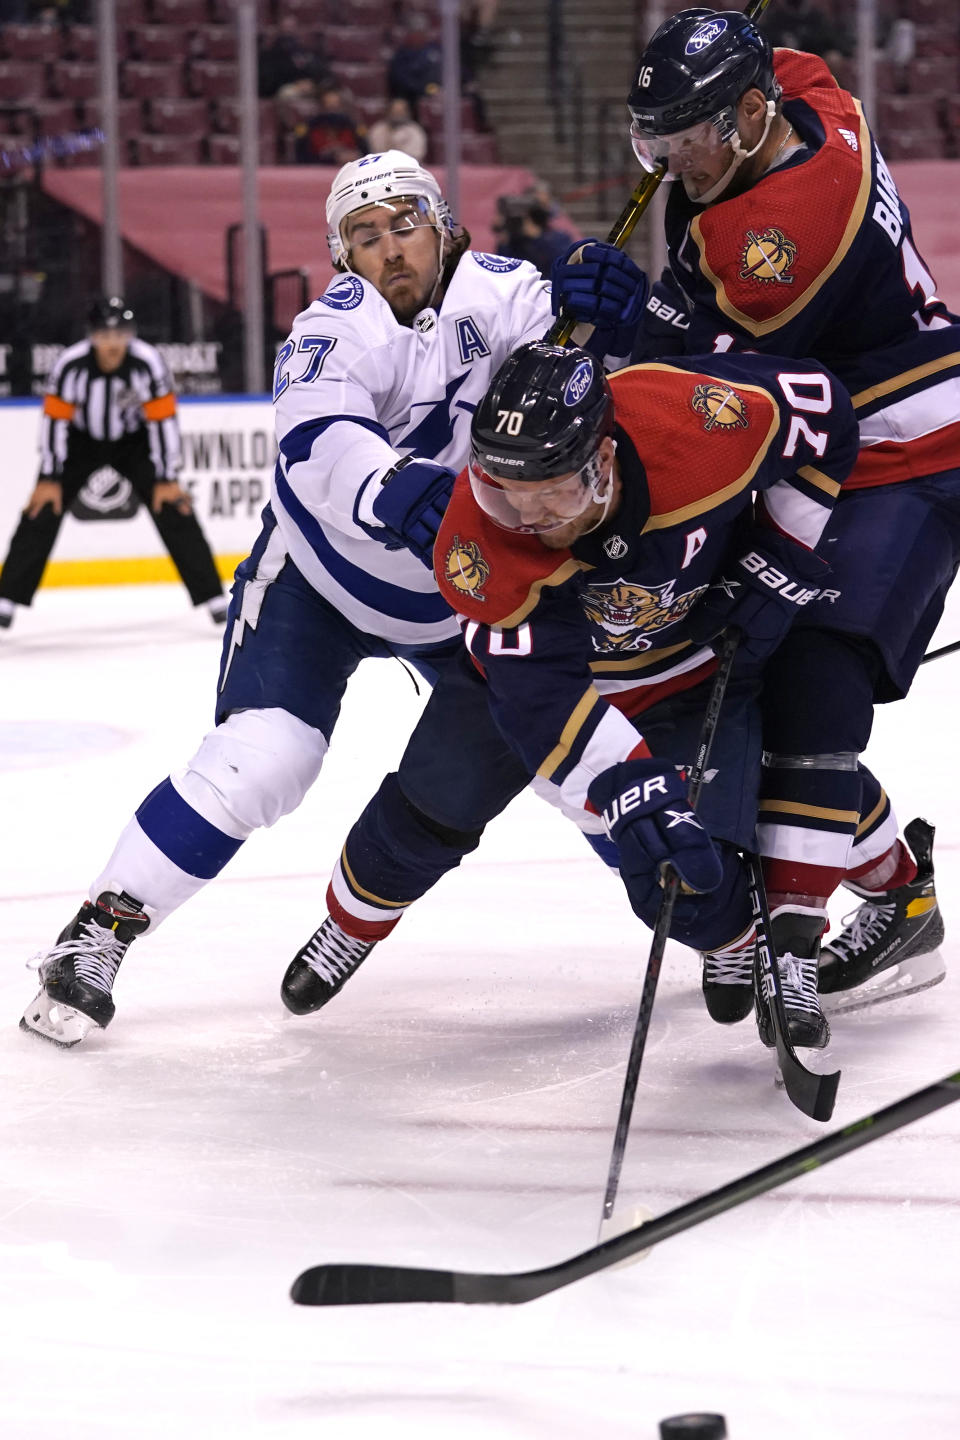 Tampa Bay Lightning defenseman Ryan McDonagh, left, Florida Panthers right wing Patric Hornqvist (70) and Panthers center Aleksander Barkov, right, go for the puck during the second period of an NHL hockey game, Saturday, Feb. 13, 2021, in Sunrise, Fla. (AP Photo/Lynne Sladky)